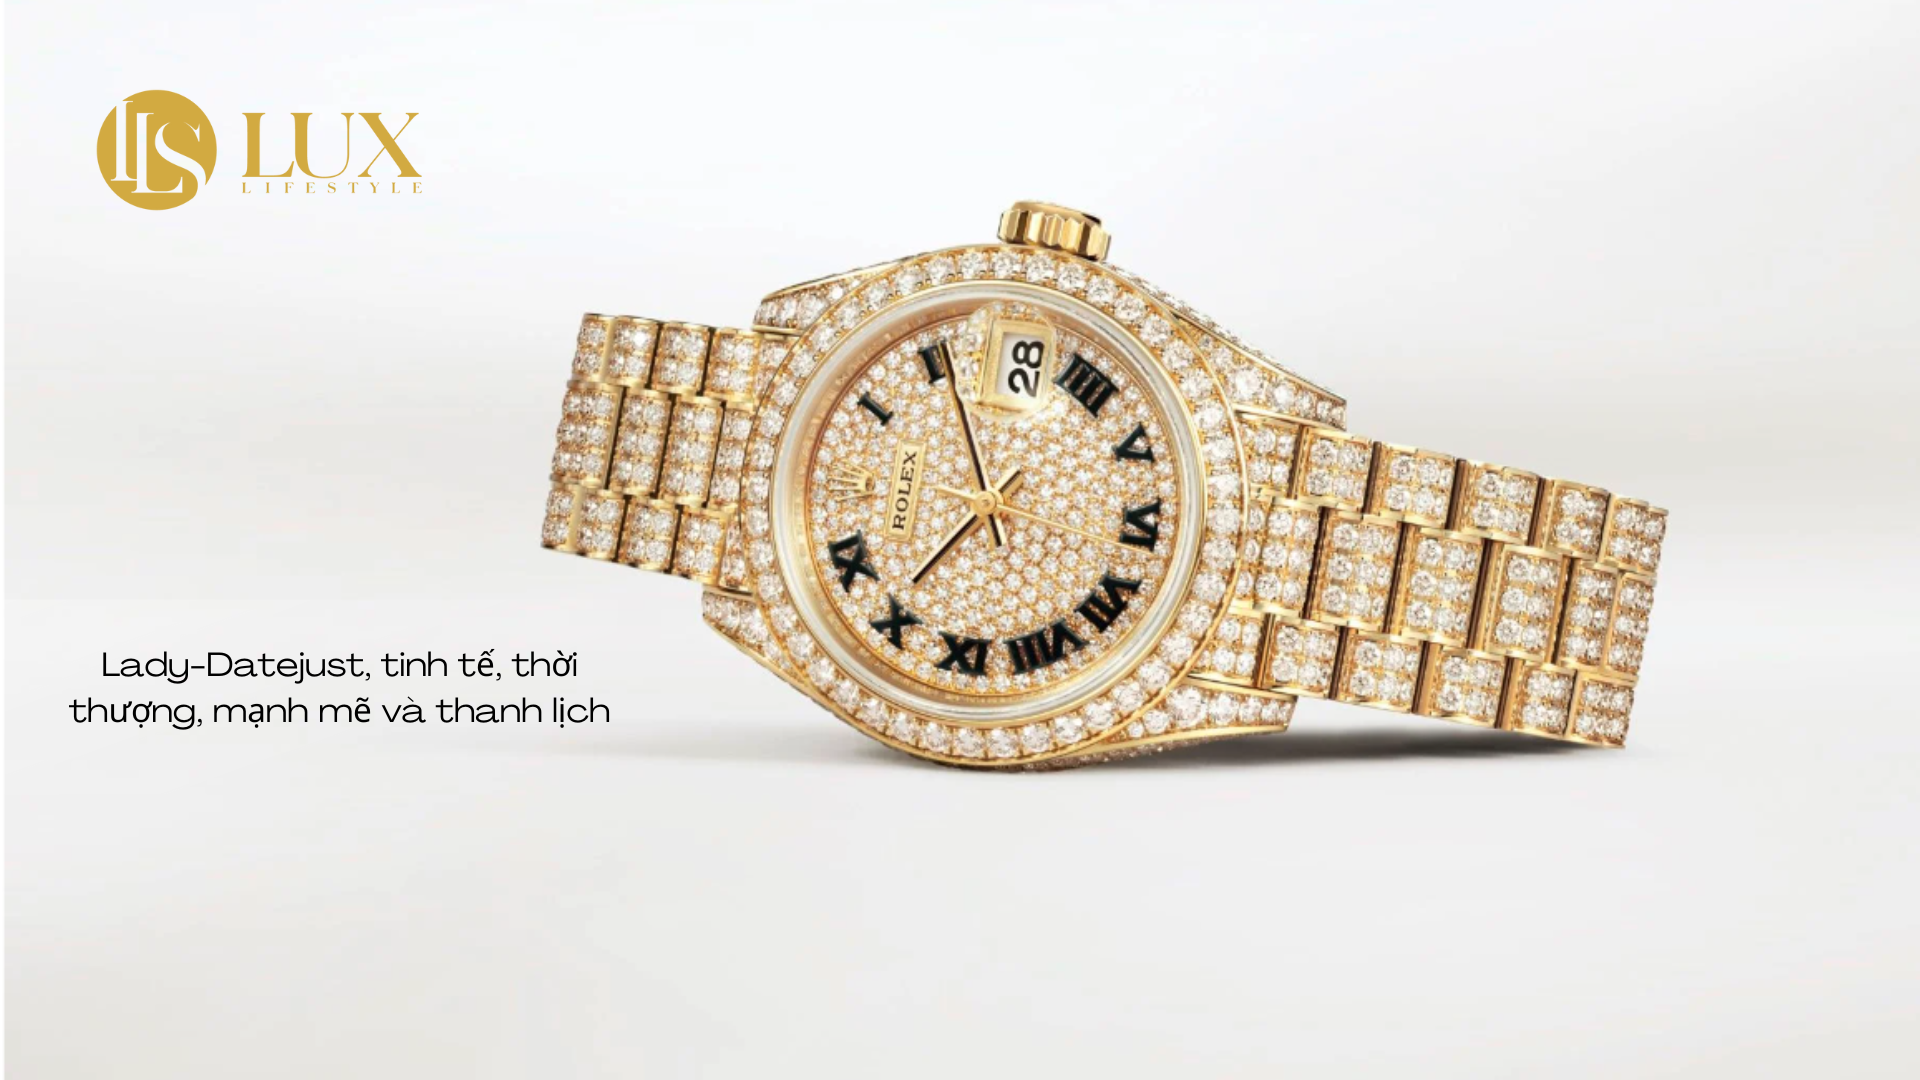 an-updated-oyster-perpetual-lady-datejust-in-yellow-gold-and-diamonds-photo-rolex-3-1656163545.png